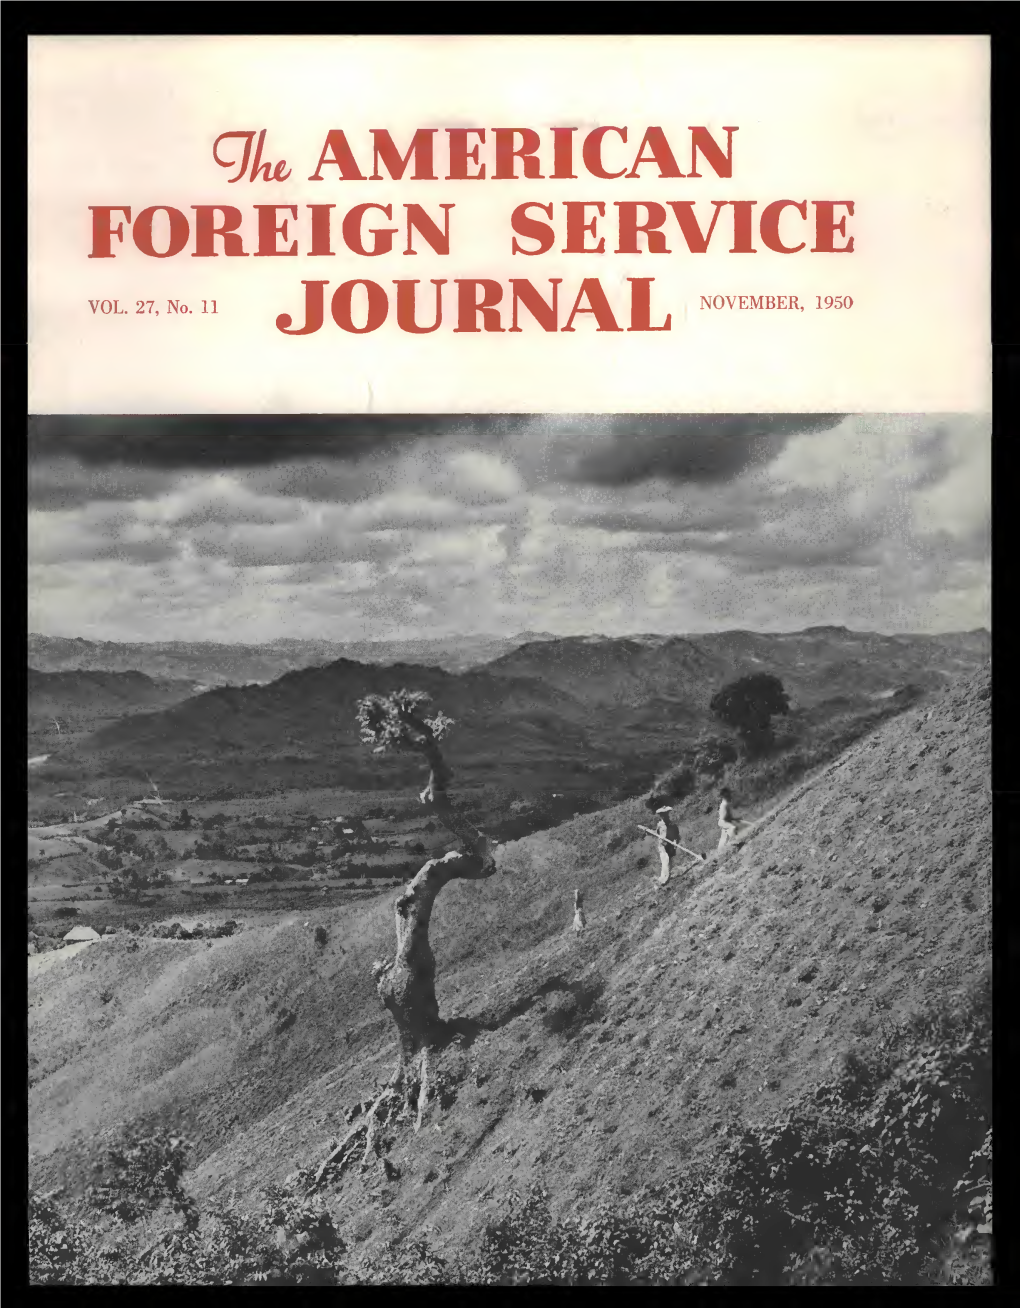 The Foreign Service Journal, November 1950